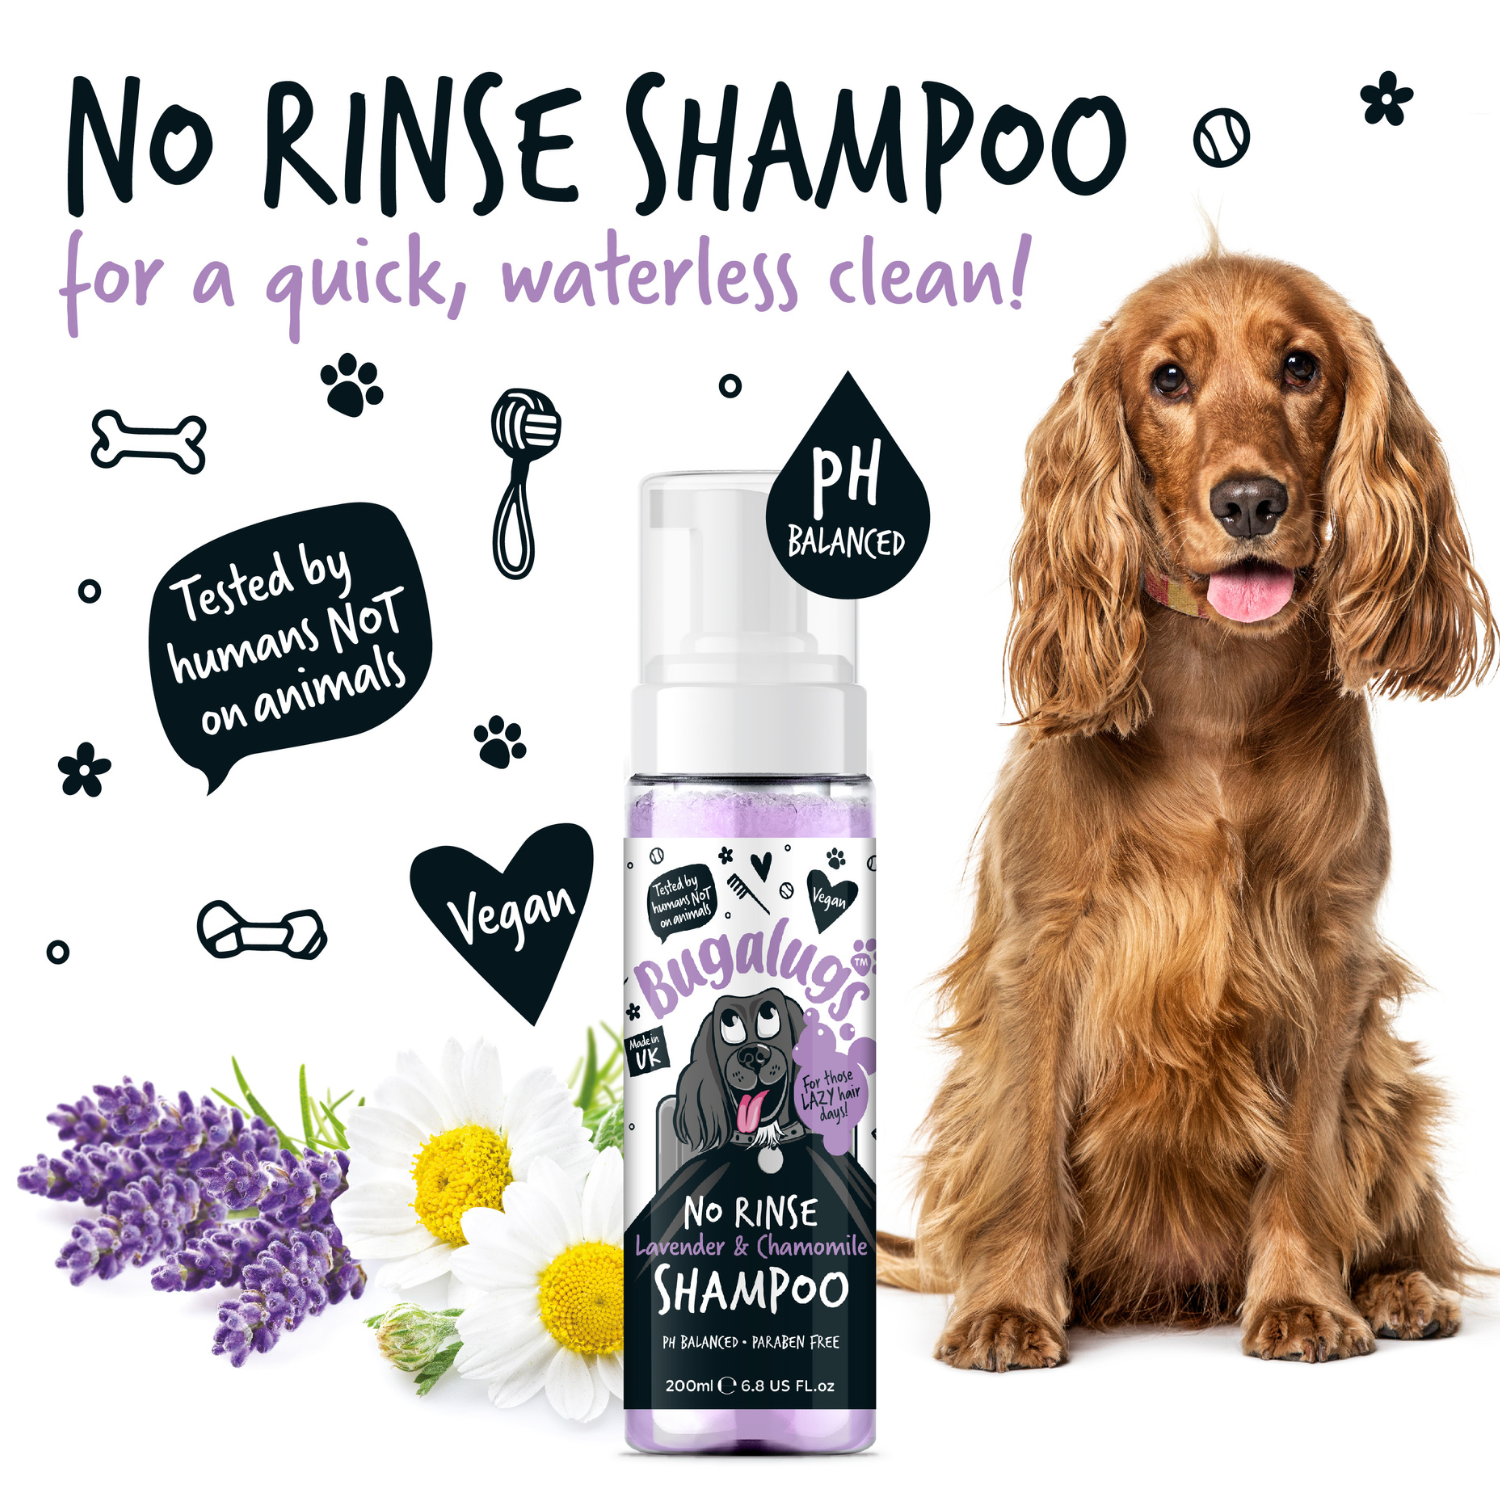 Bugalugs No Rinse Lavender and Chamomile Shampoo for Dogs - For a quick, waterless clean